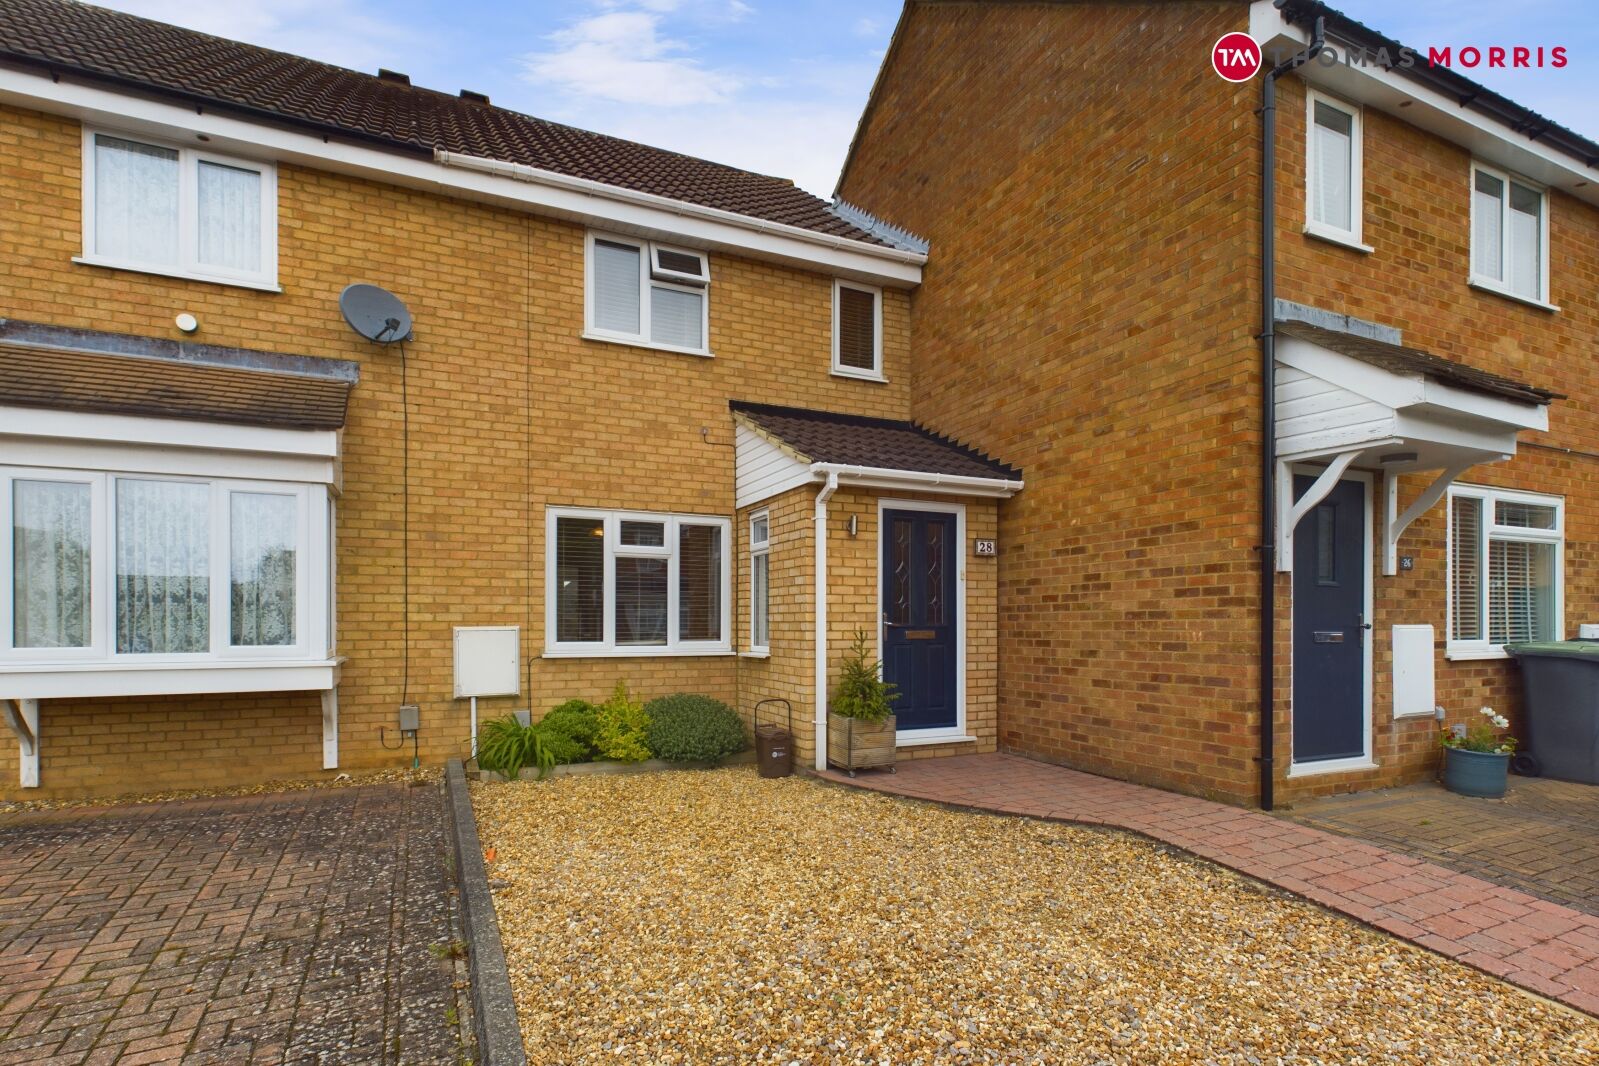 3 bedroom mid terraced house for sale Lincoln Crescent, Biggleswade, SG18, main image